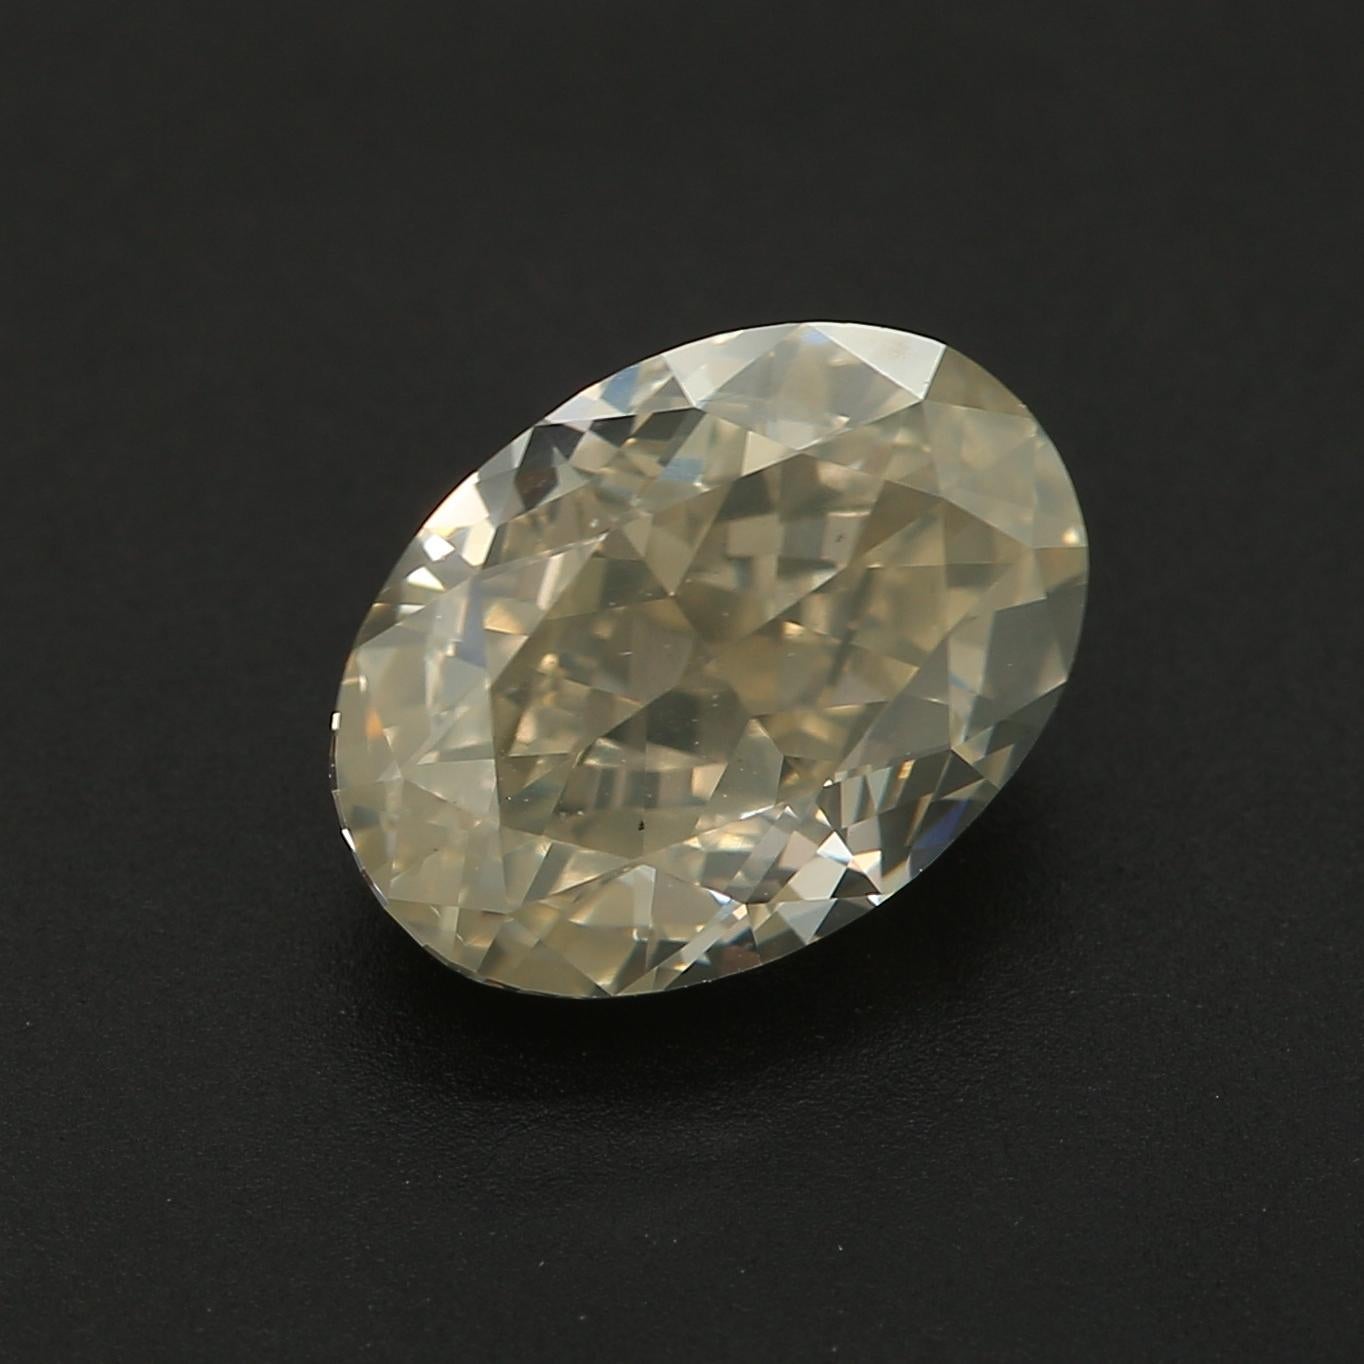 ***100% NATURAL FANCY COLOUR DIAMOND***

✪ Diamond Details ✪

➛ Shape: Oval
➛ Colour Grade: M
➛ Carat: 1.78
➛ Clarity: SI2
➛ IGI Certified 

^FEATURES OF THE DIAMOND^

This diamond weighs 1.78 carats, indicating its size and mass. It has a